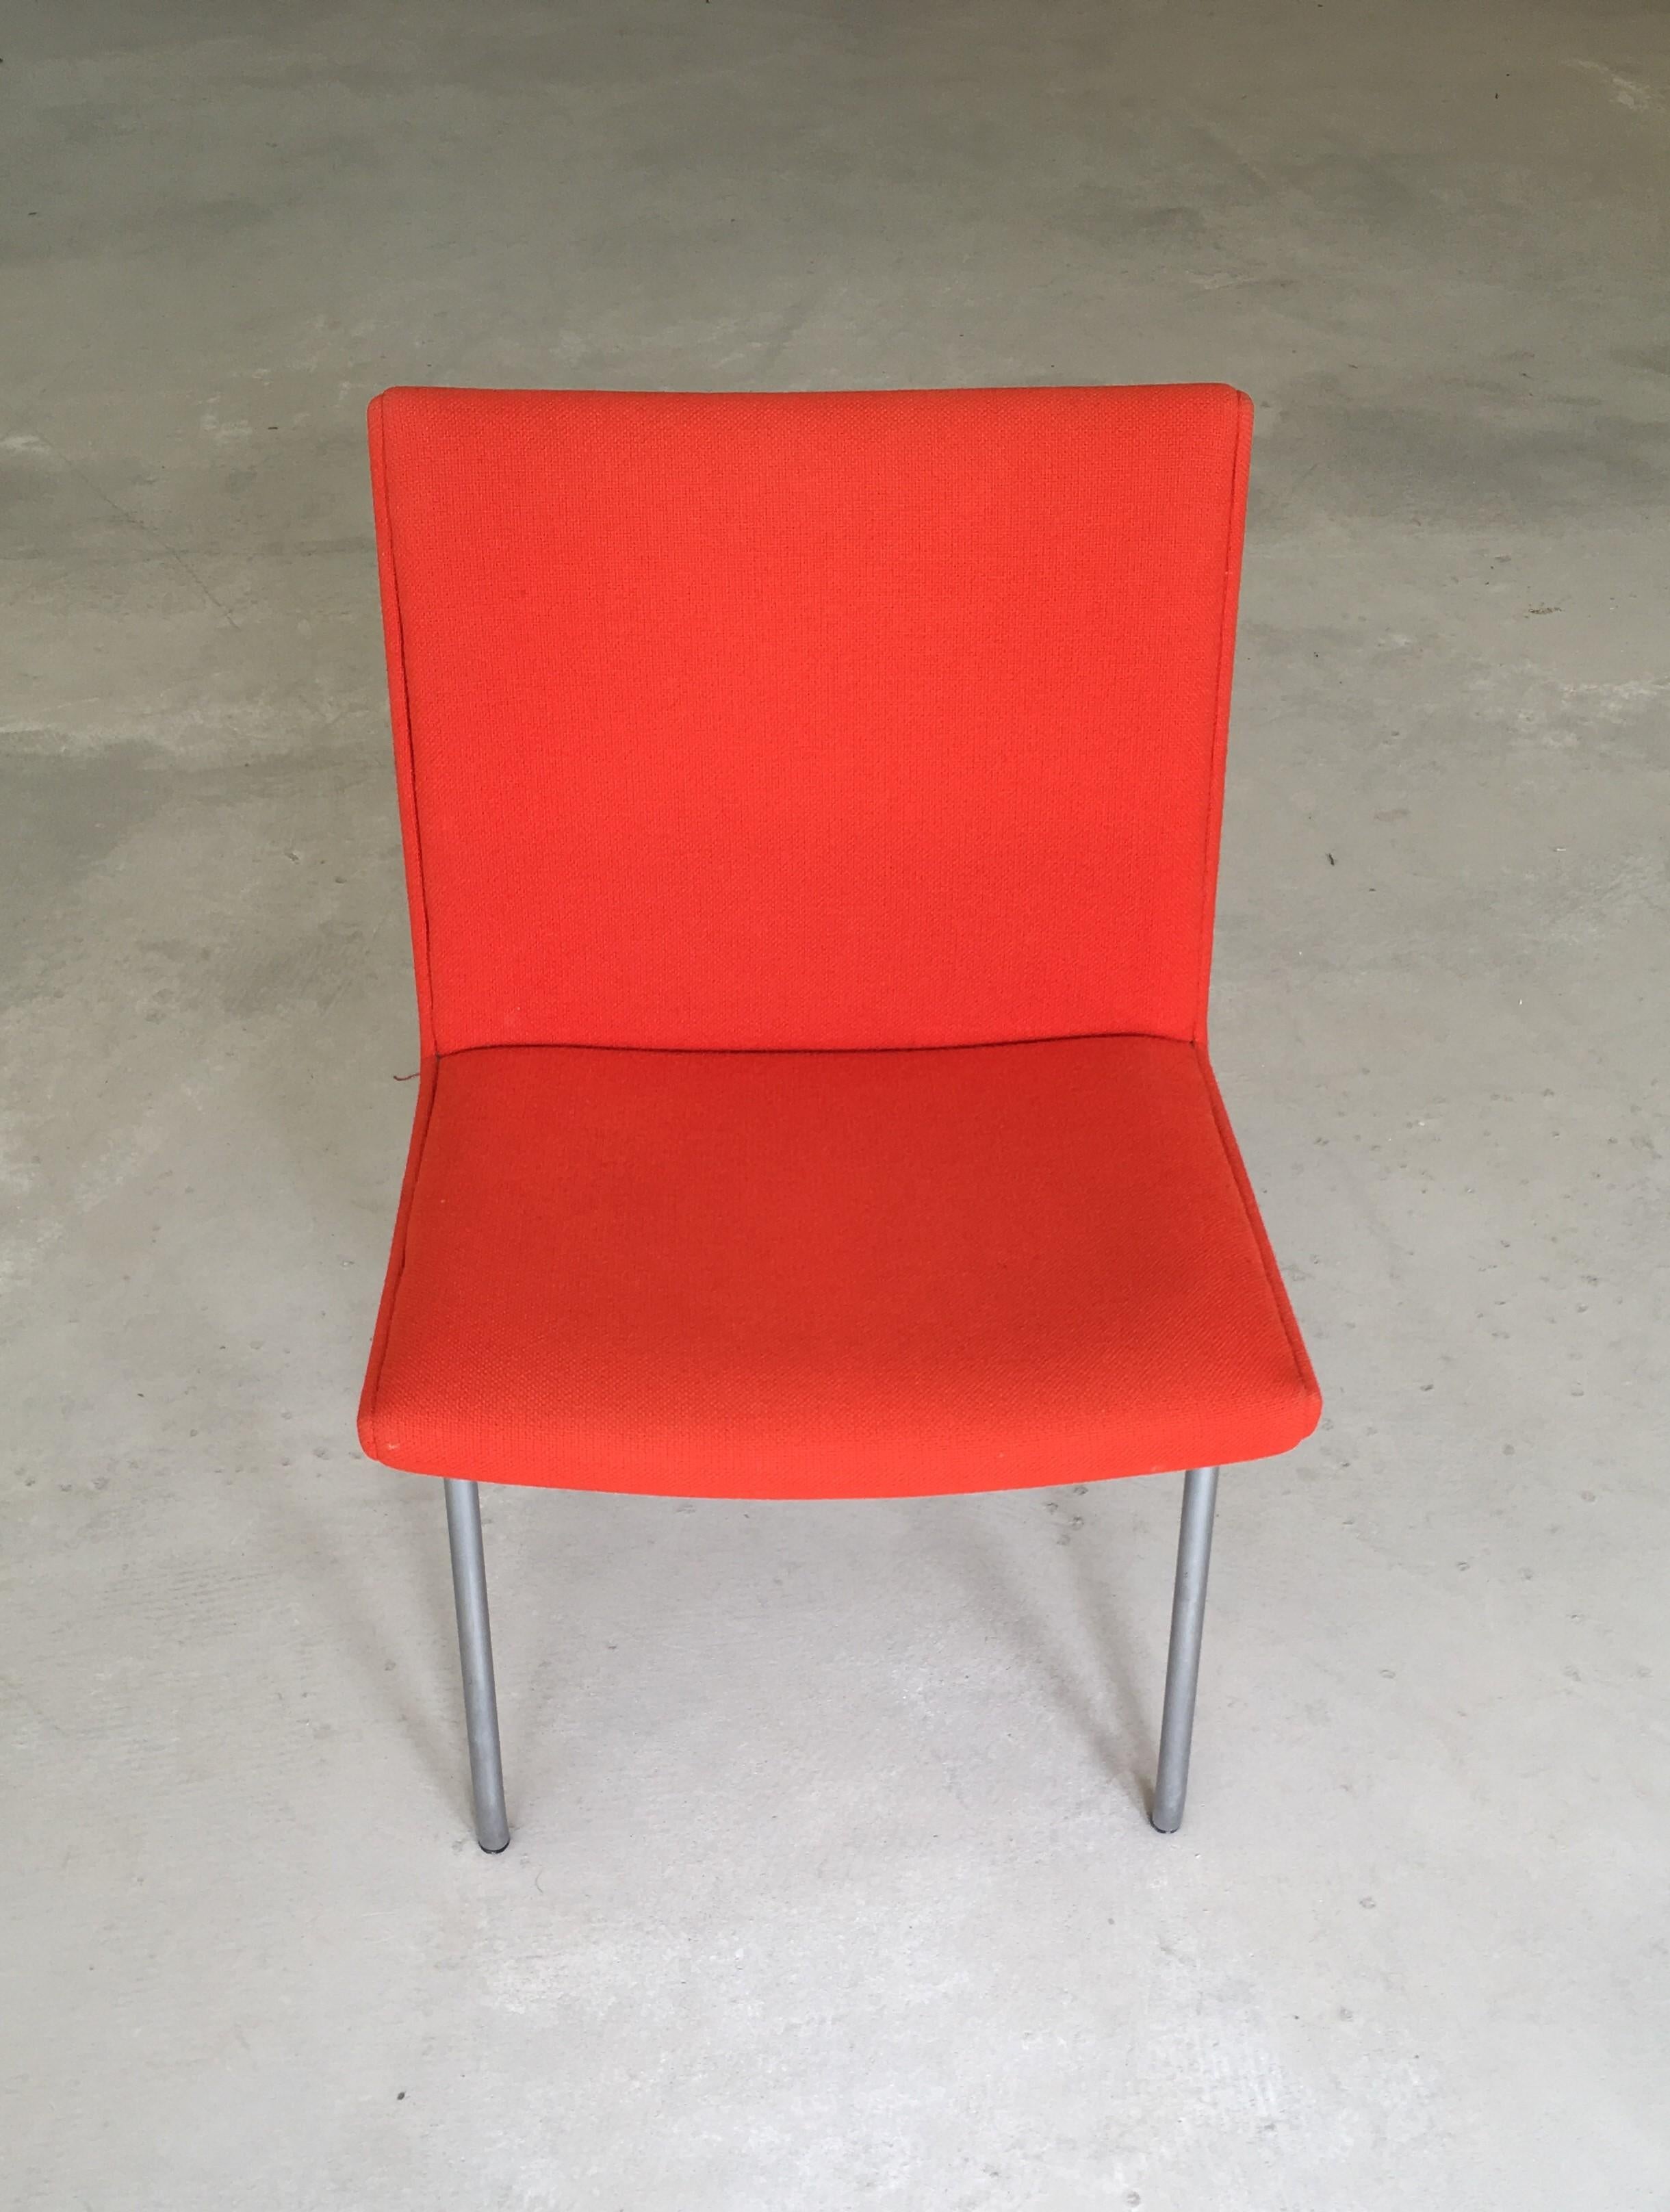 Hans Wegner AP38 'Airport' chair by A.P. Stolen.

Exceptional modern chair. Designed in 1958, on tubular-steel frames with sharp triangle boomerang shape. Seat have been reupholstered with orange Kvadrat Hallingdal 65. 

Although not designed